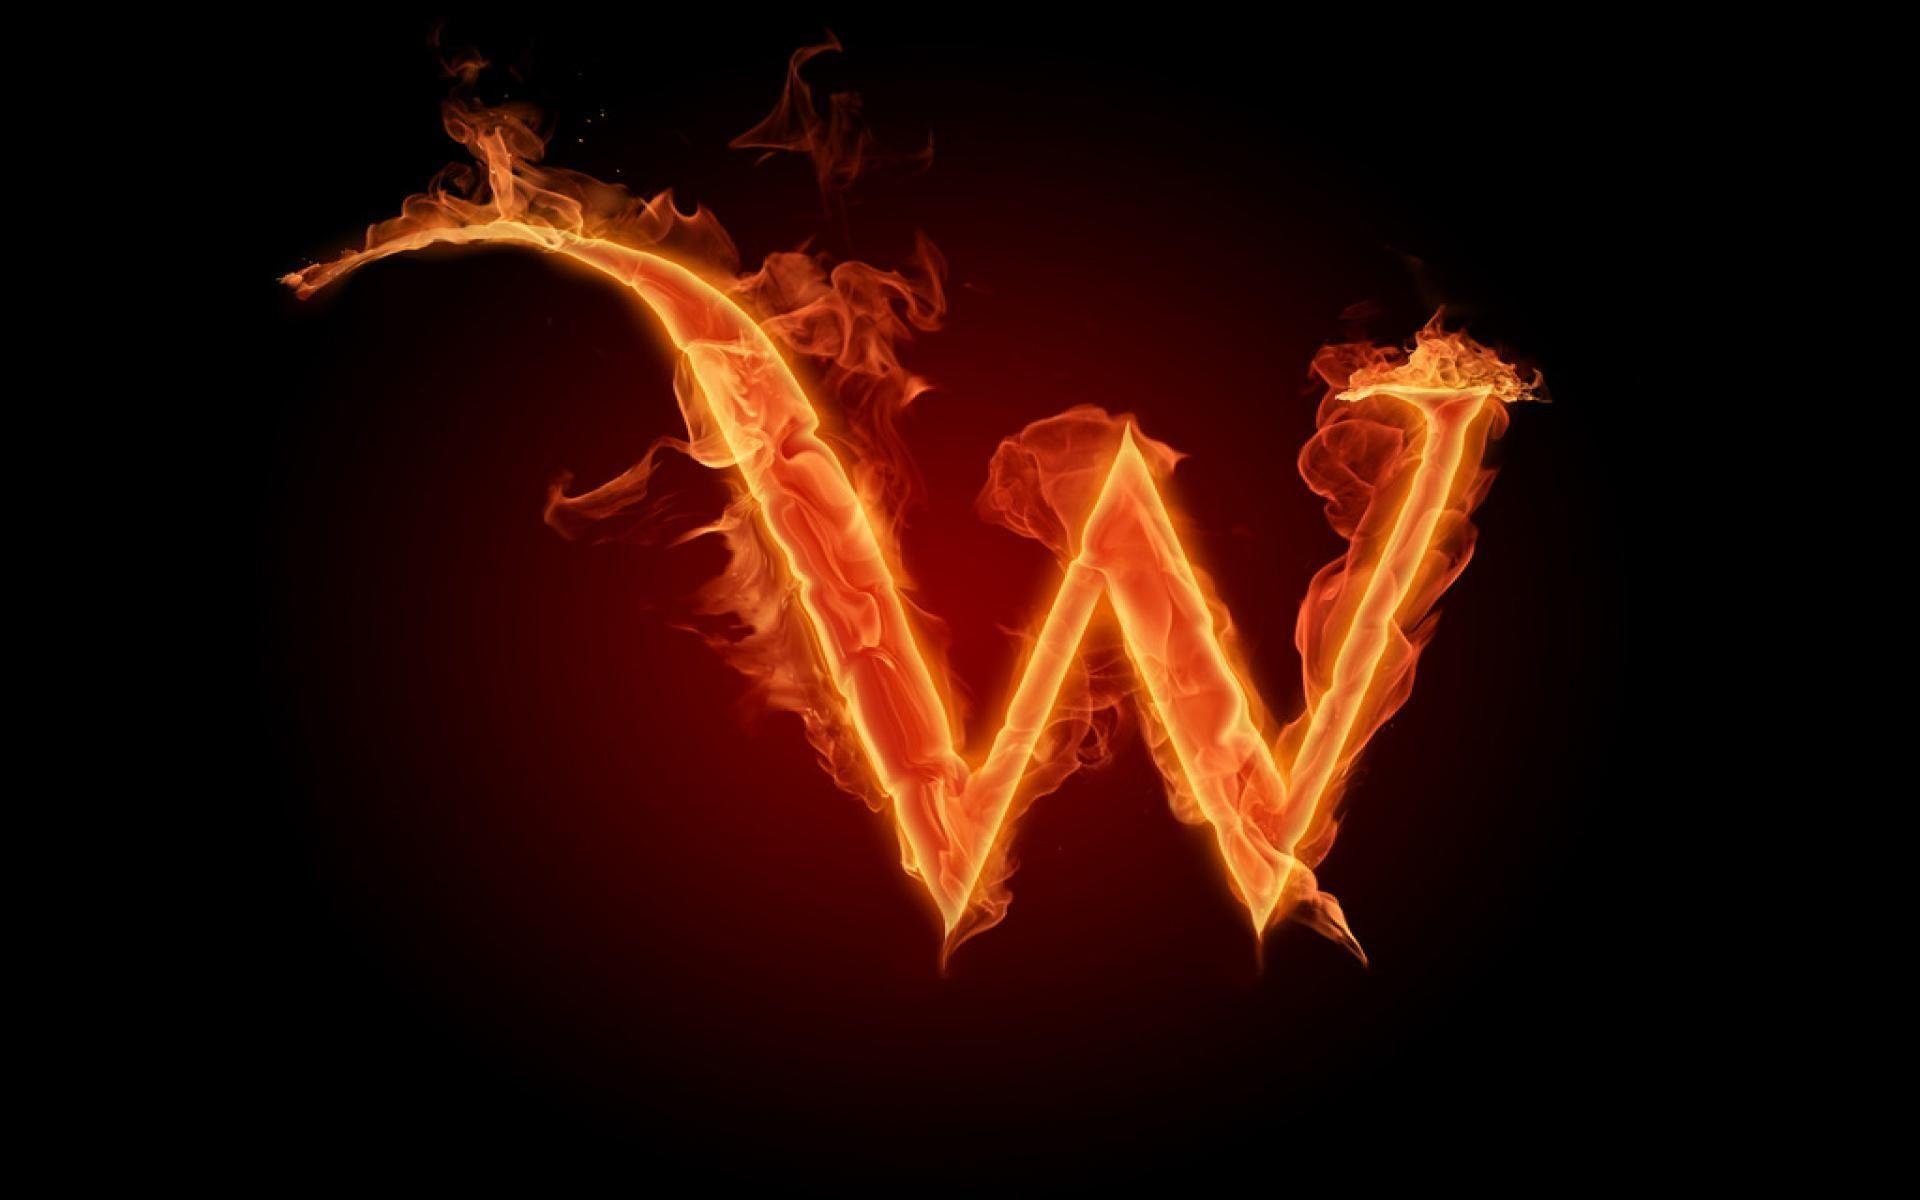 Burning Fire Letter W Wallpaper Download. Letter w, Picture letters, Lettering